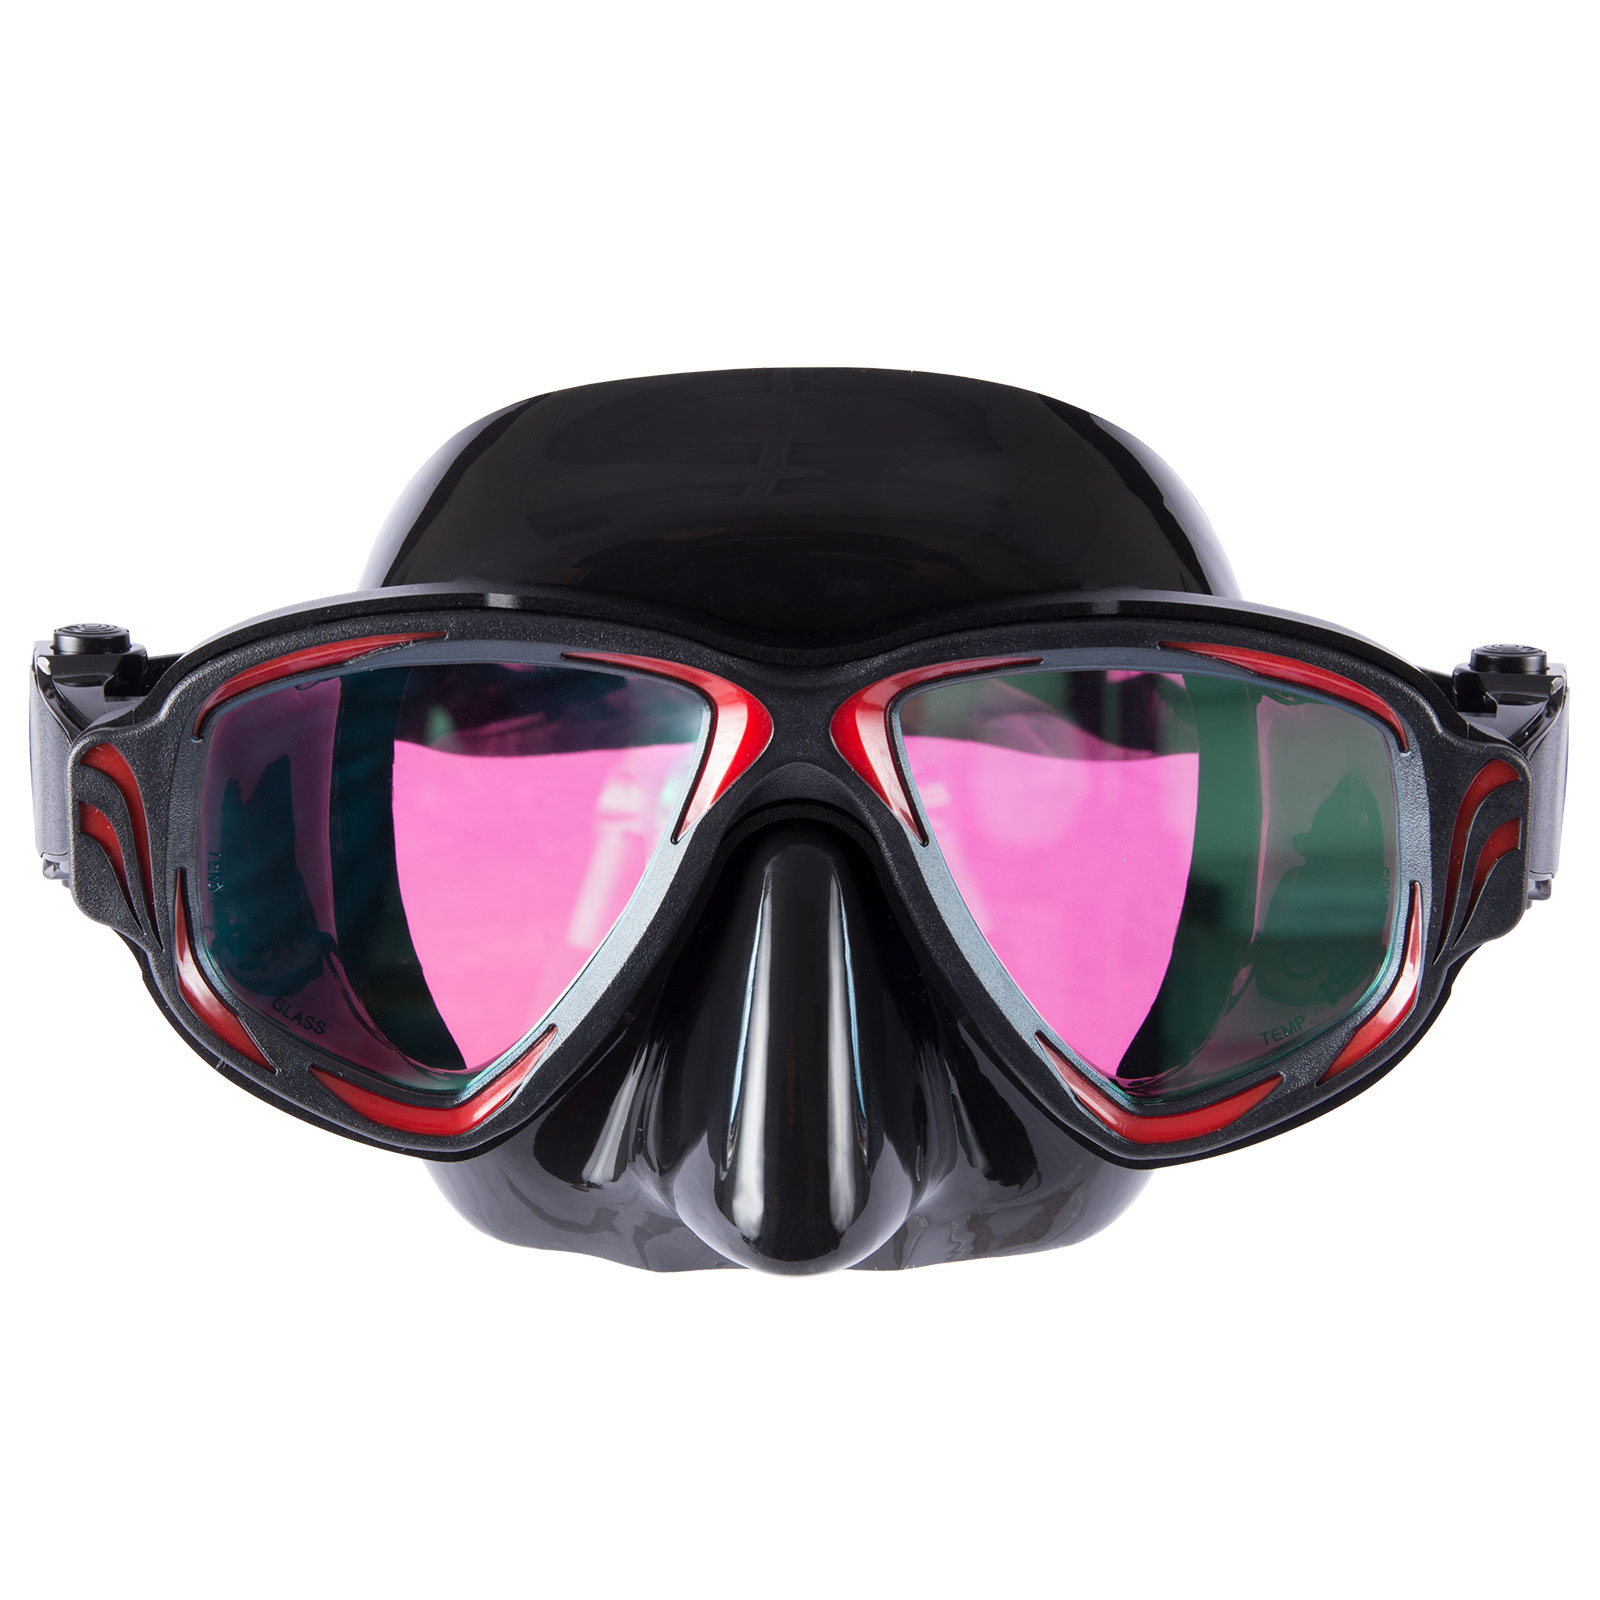 IST Diving System :: RECREATIONAL :: MASKS :: Synthesis TINTED LENS